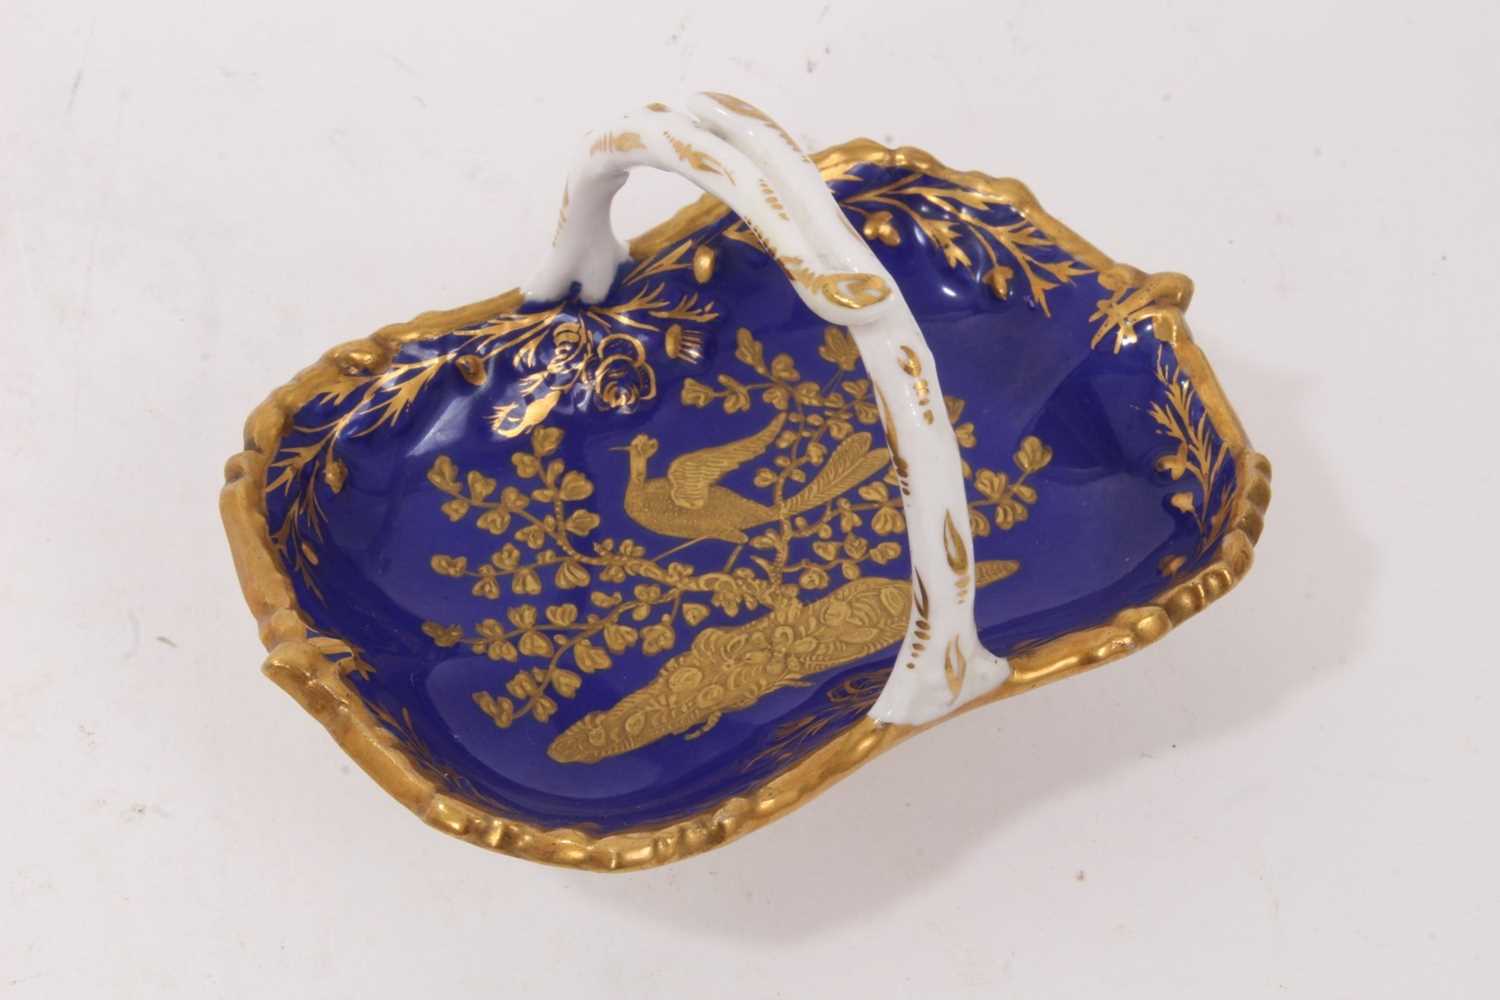 Lot 70 - A Spode small rectangular basket, decorated in raised paste gilding, circa 1820